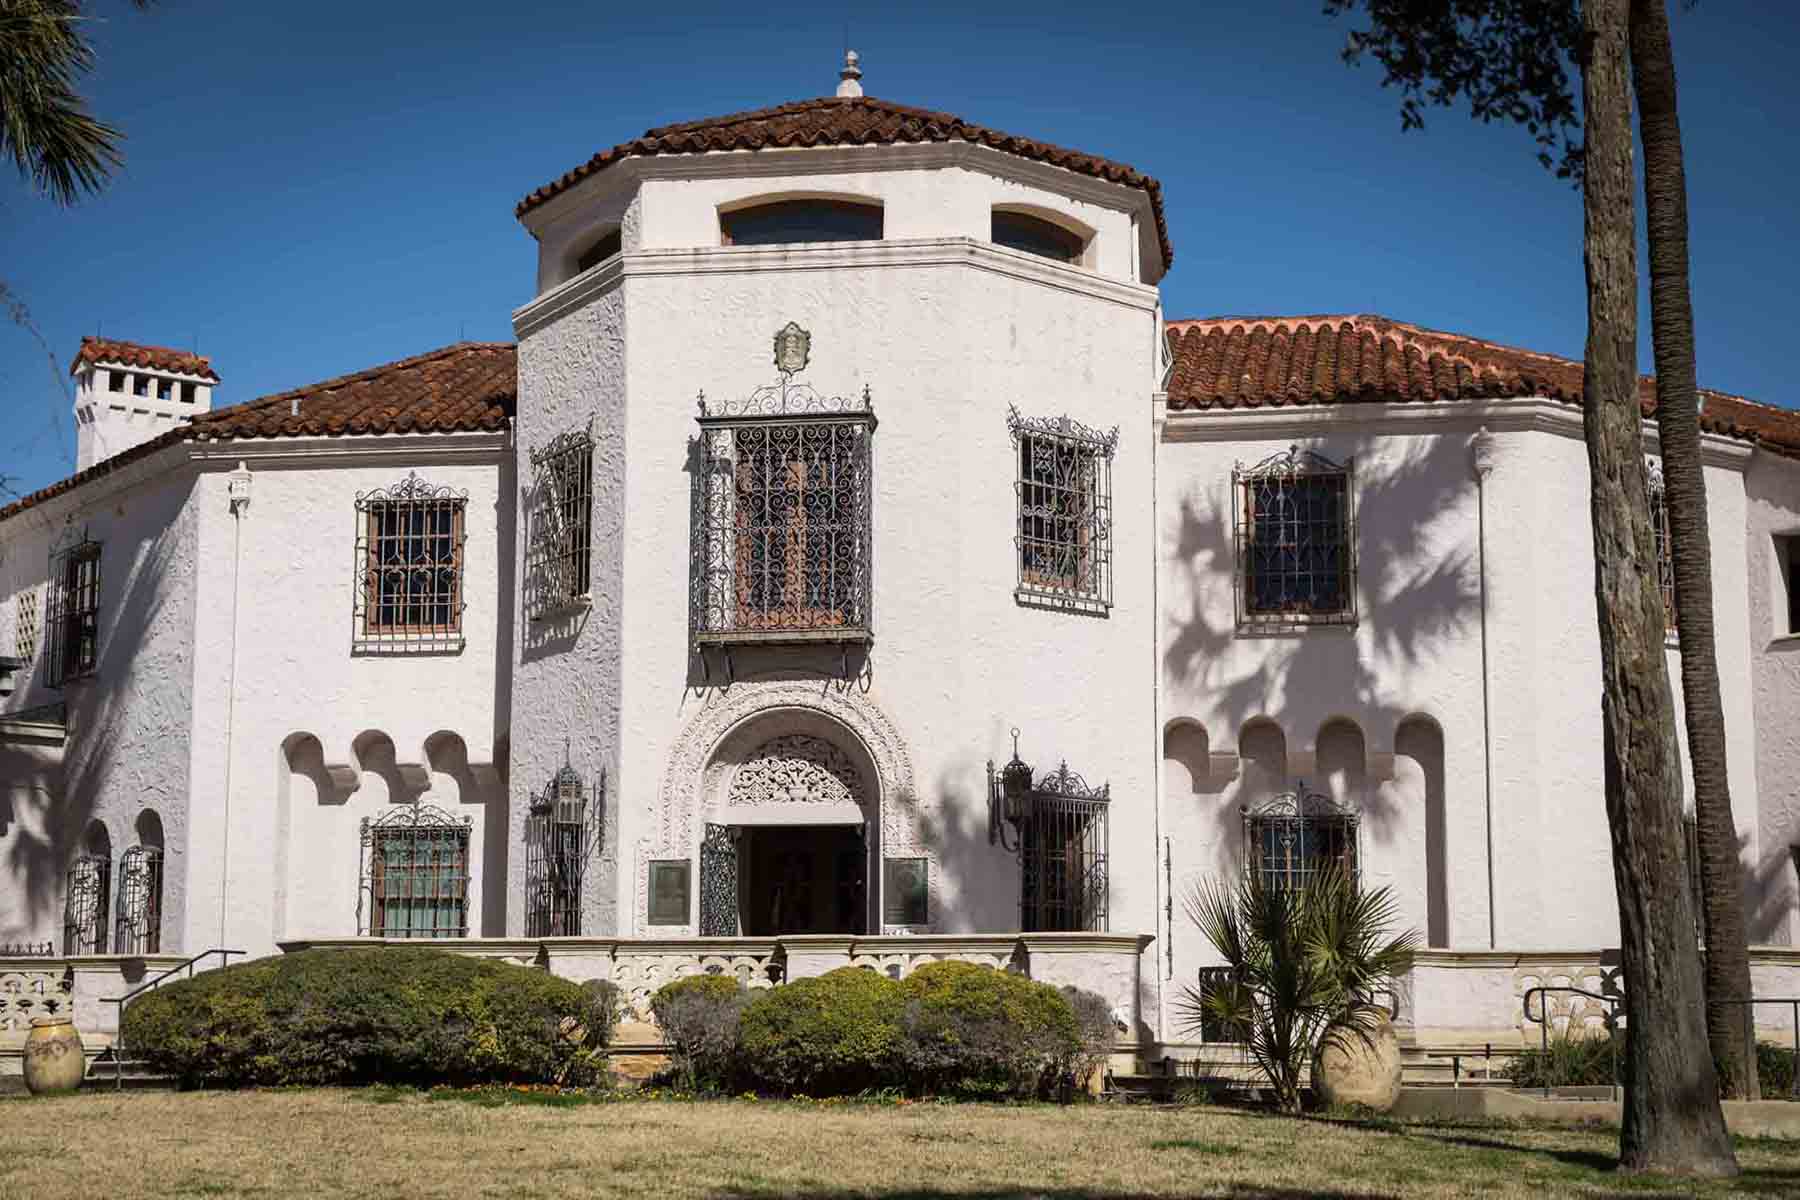 Main house of McNay Art Museum for an article on how to take photos at the McNay Art Museum